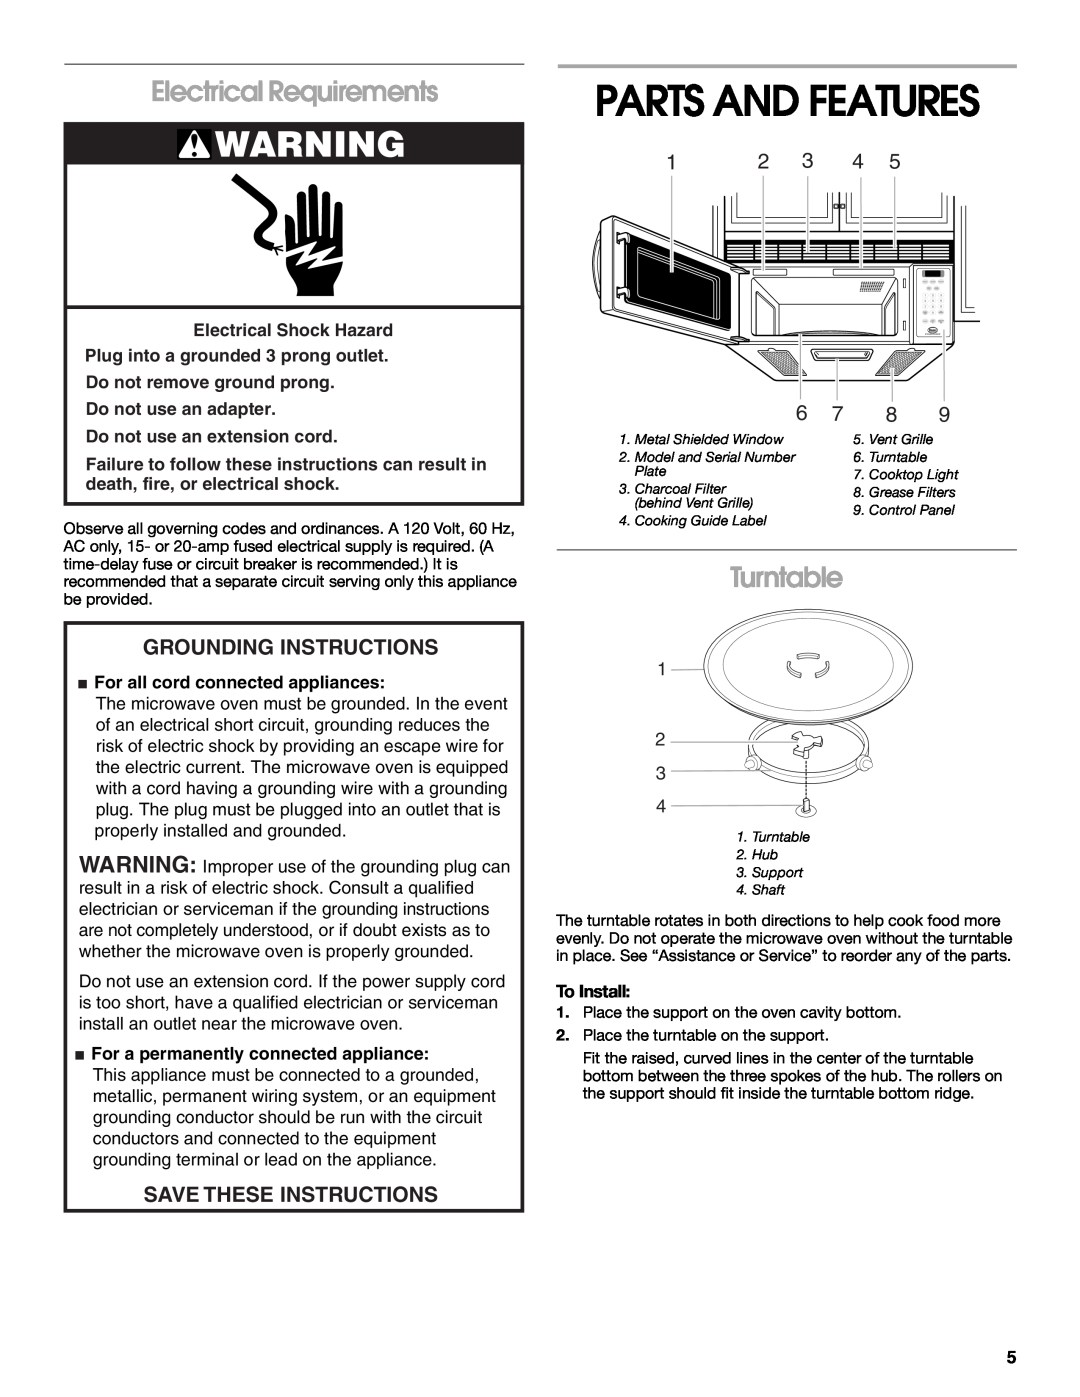 Whirlpool TMH14XL Parts And Features, Electrical Requirements, Turntable, Grounding Instructions, Save These Instructions 